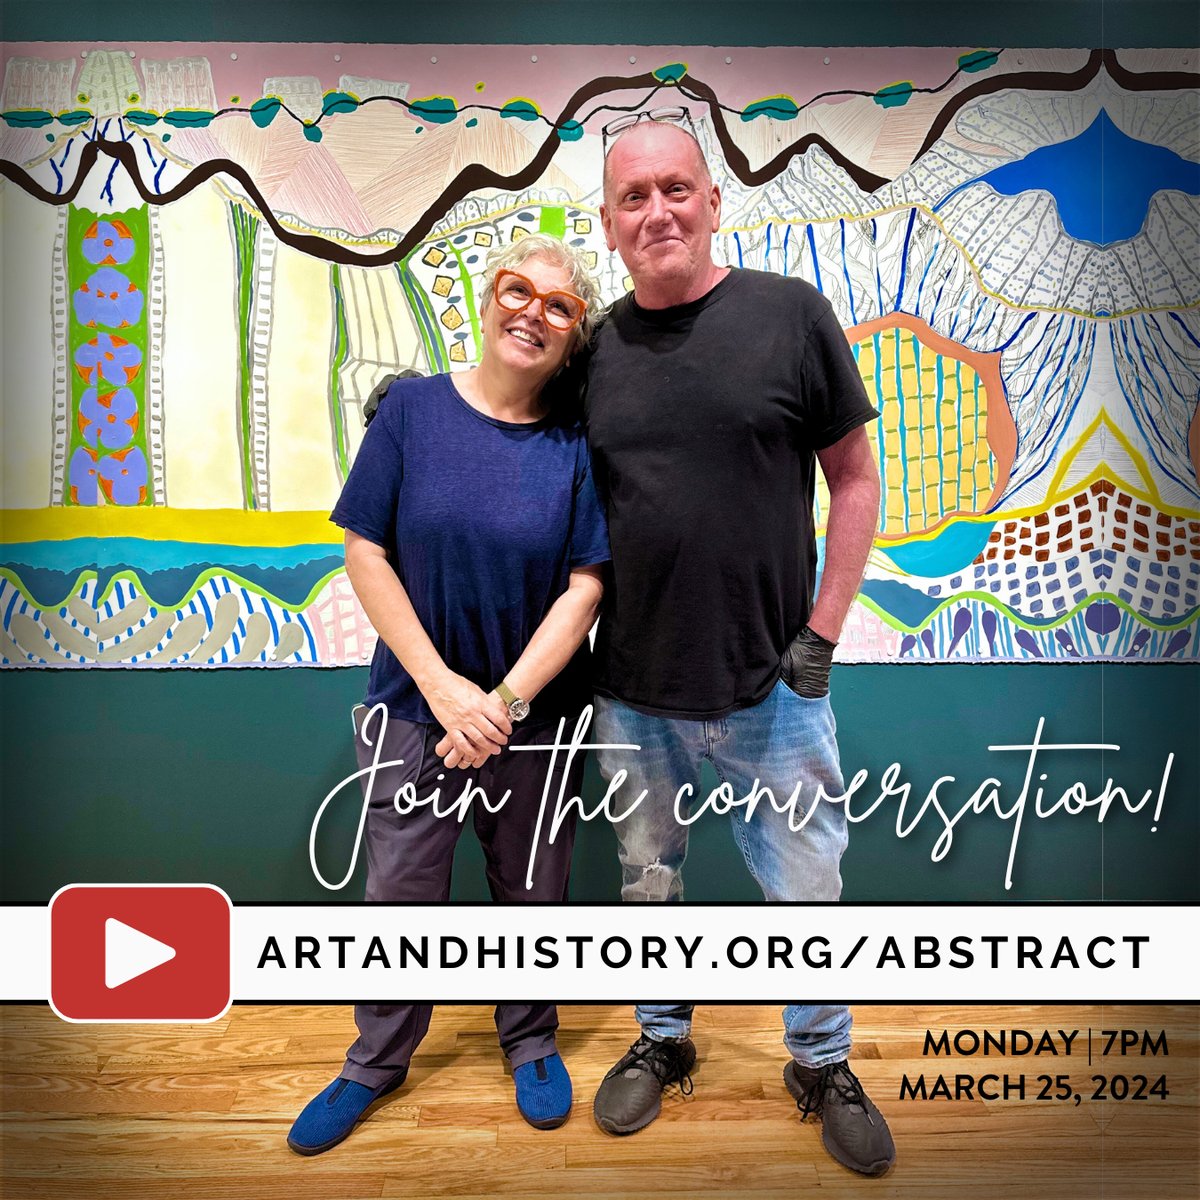 Join us online at 7pm tonight: artandhistory.org/abstract - A&H Chief Curator Dan L. Hess hosts artist Carole d'Inverno to discuss the role of abstraction in art during this talk, originally recorded in 2023. 

#AbstractArt #ArtistTalk #WomensHistoryMonth